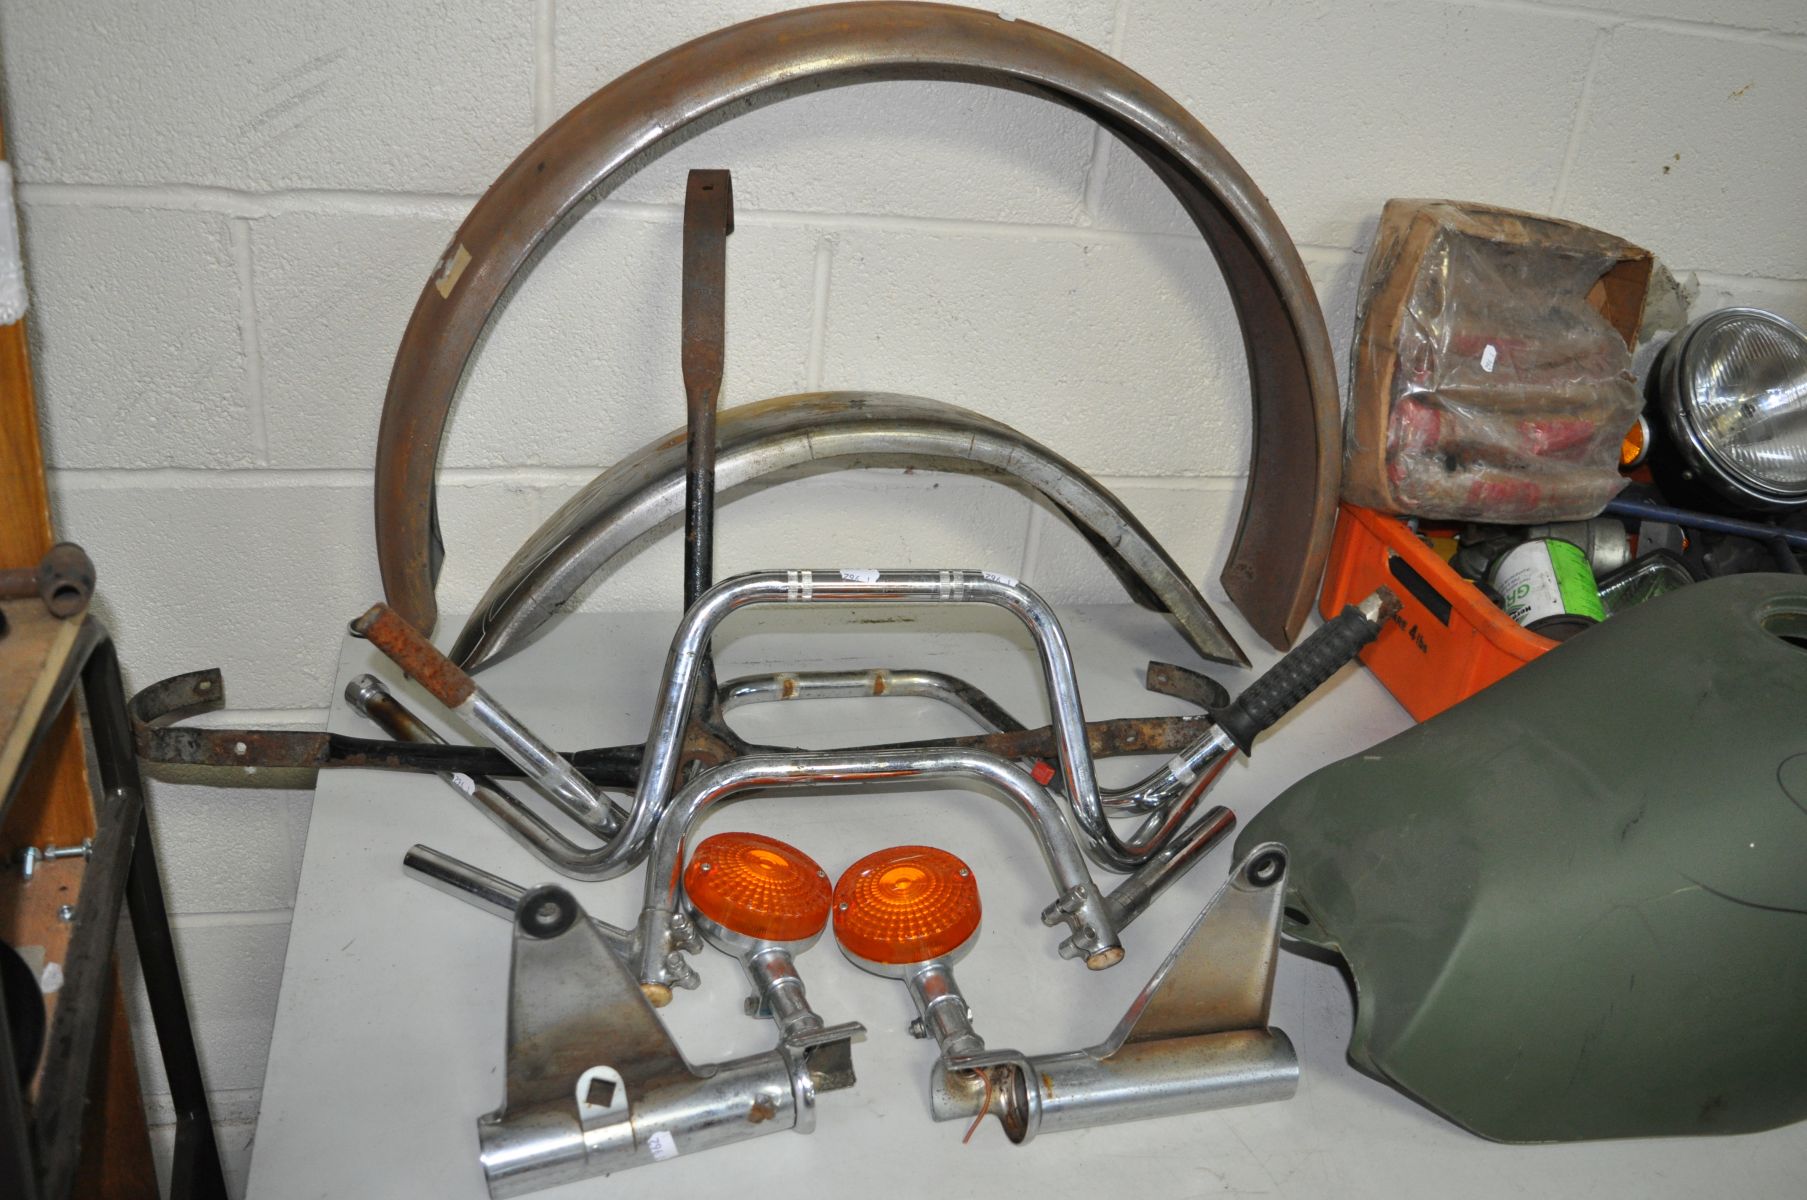 TWO TRAYS CONTAINING VINTAGE AUTOMOTIVE PARTS, including a motorbike fuel tank, mud guards, handle - Image 2 of 4